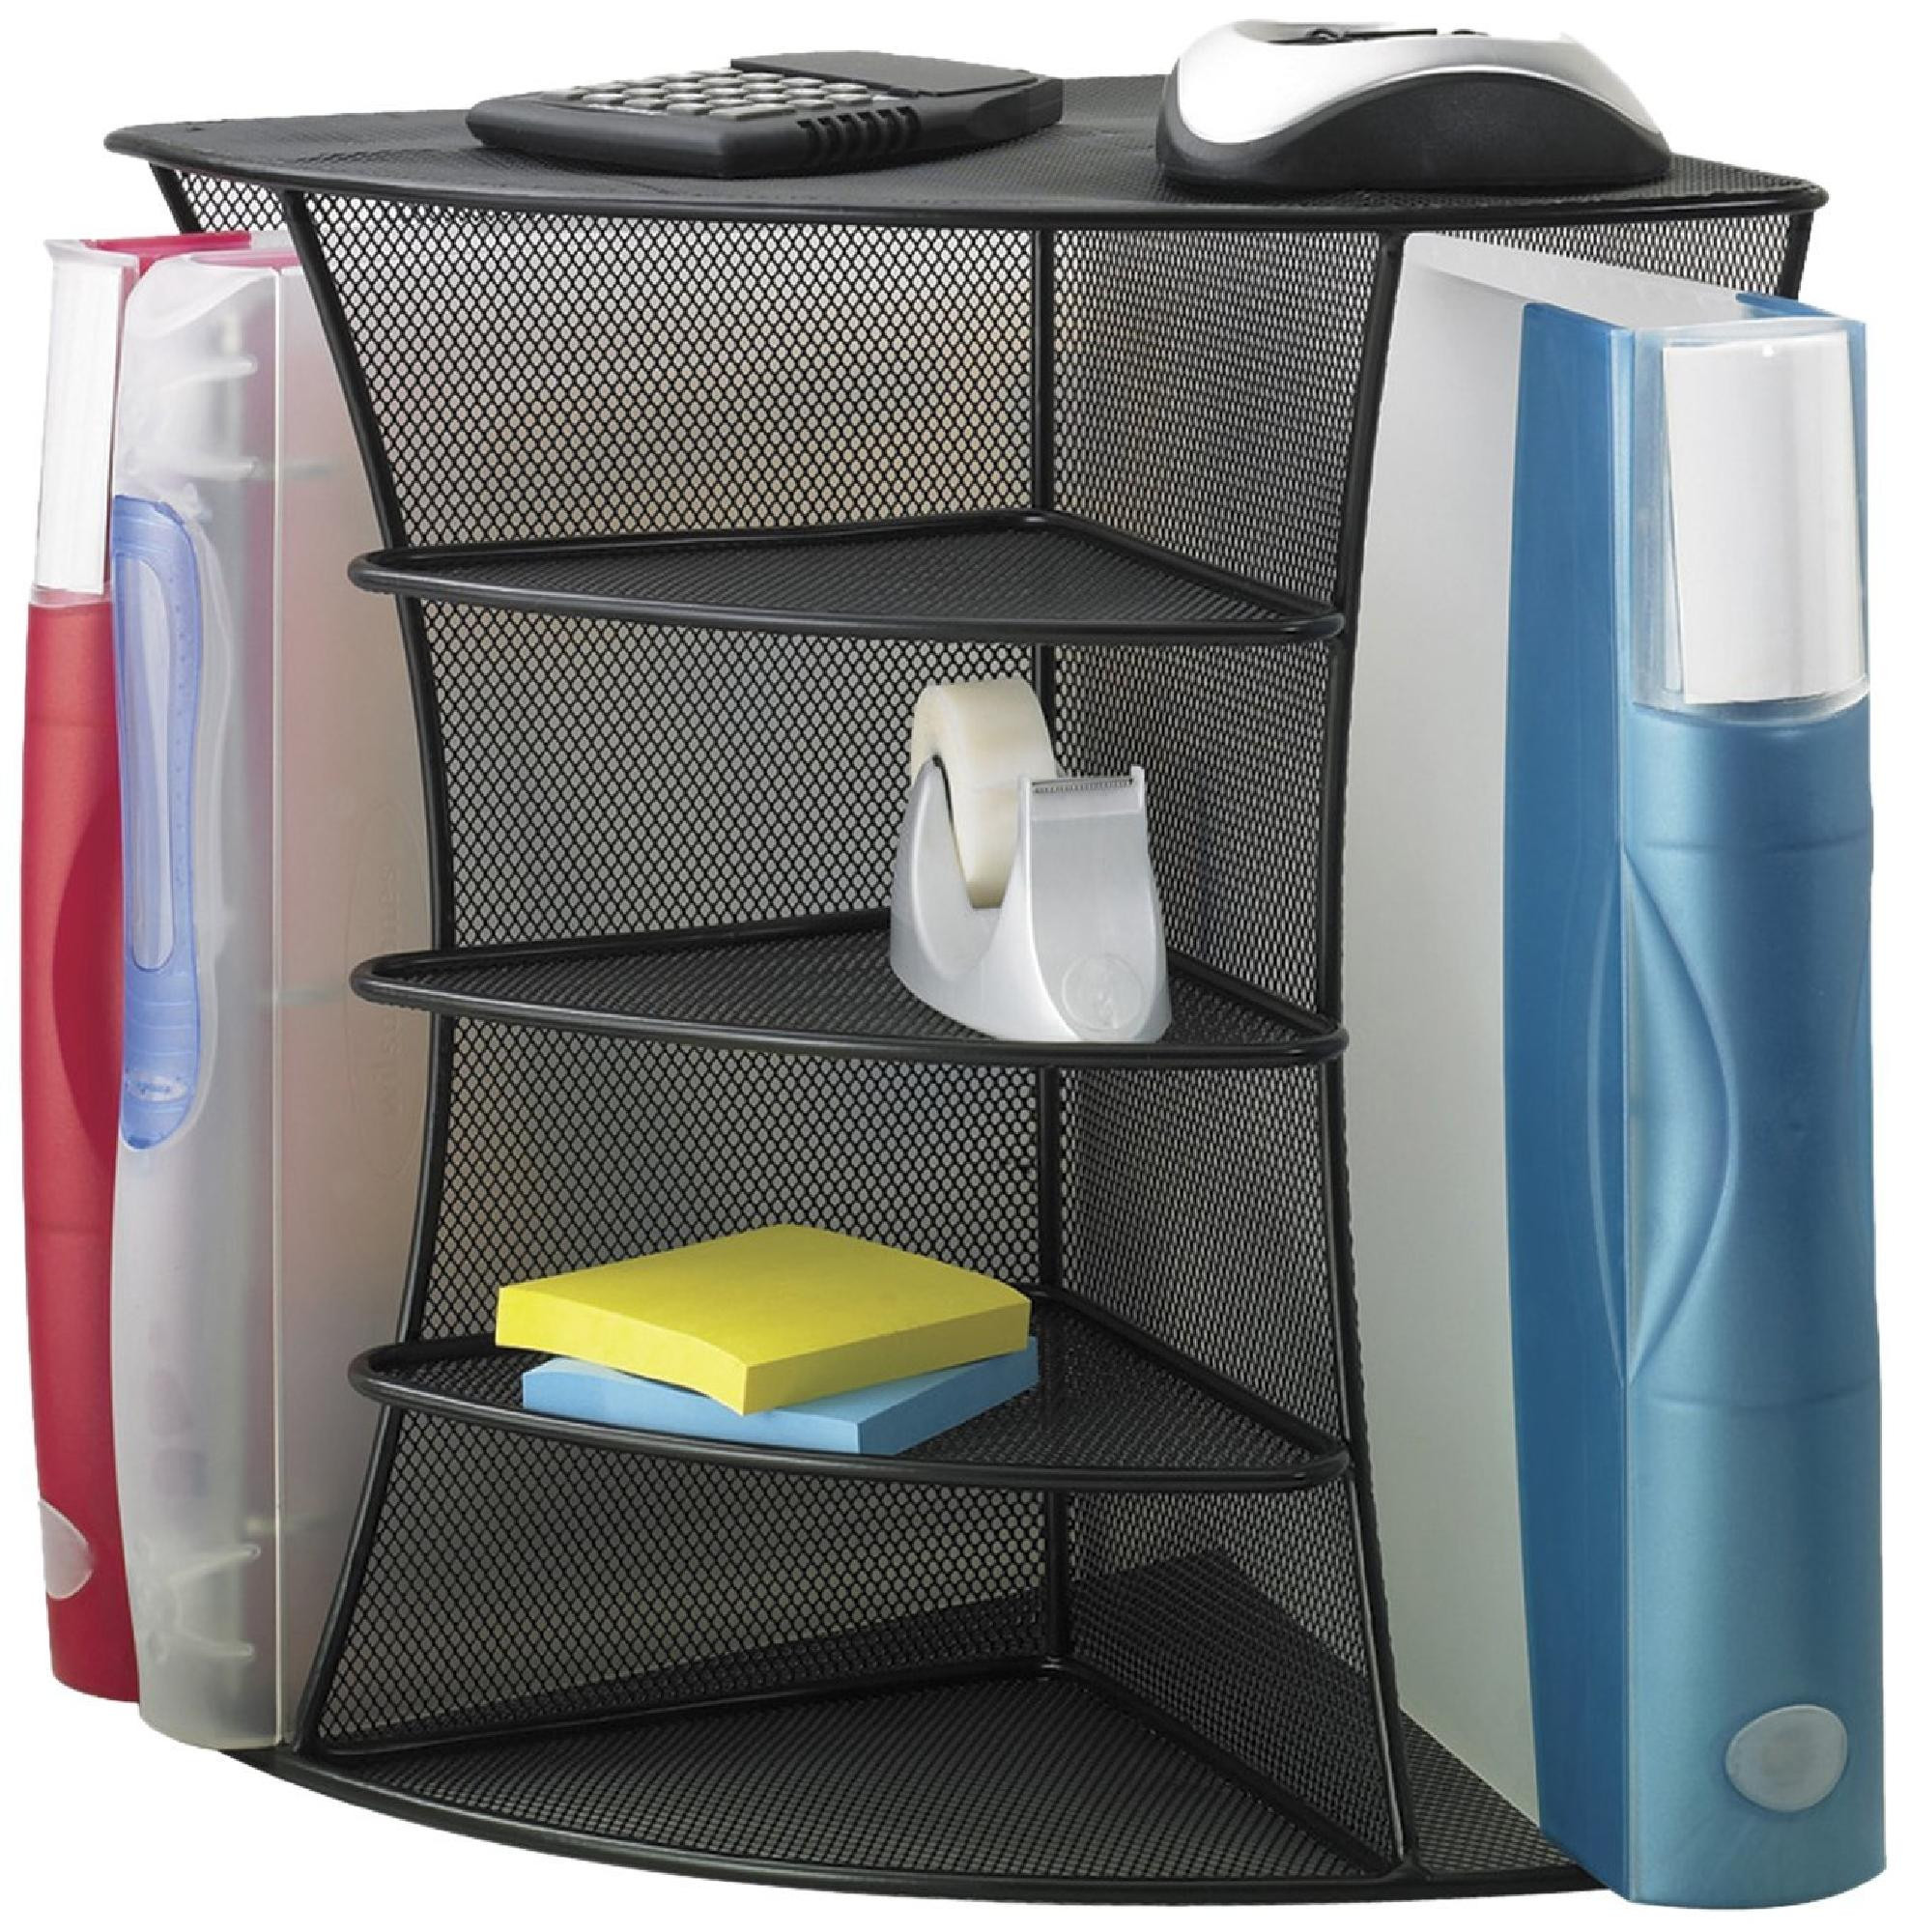 Office Organization Products
 fice Organization Products That Make Life Easier